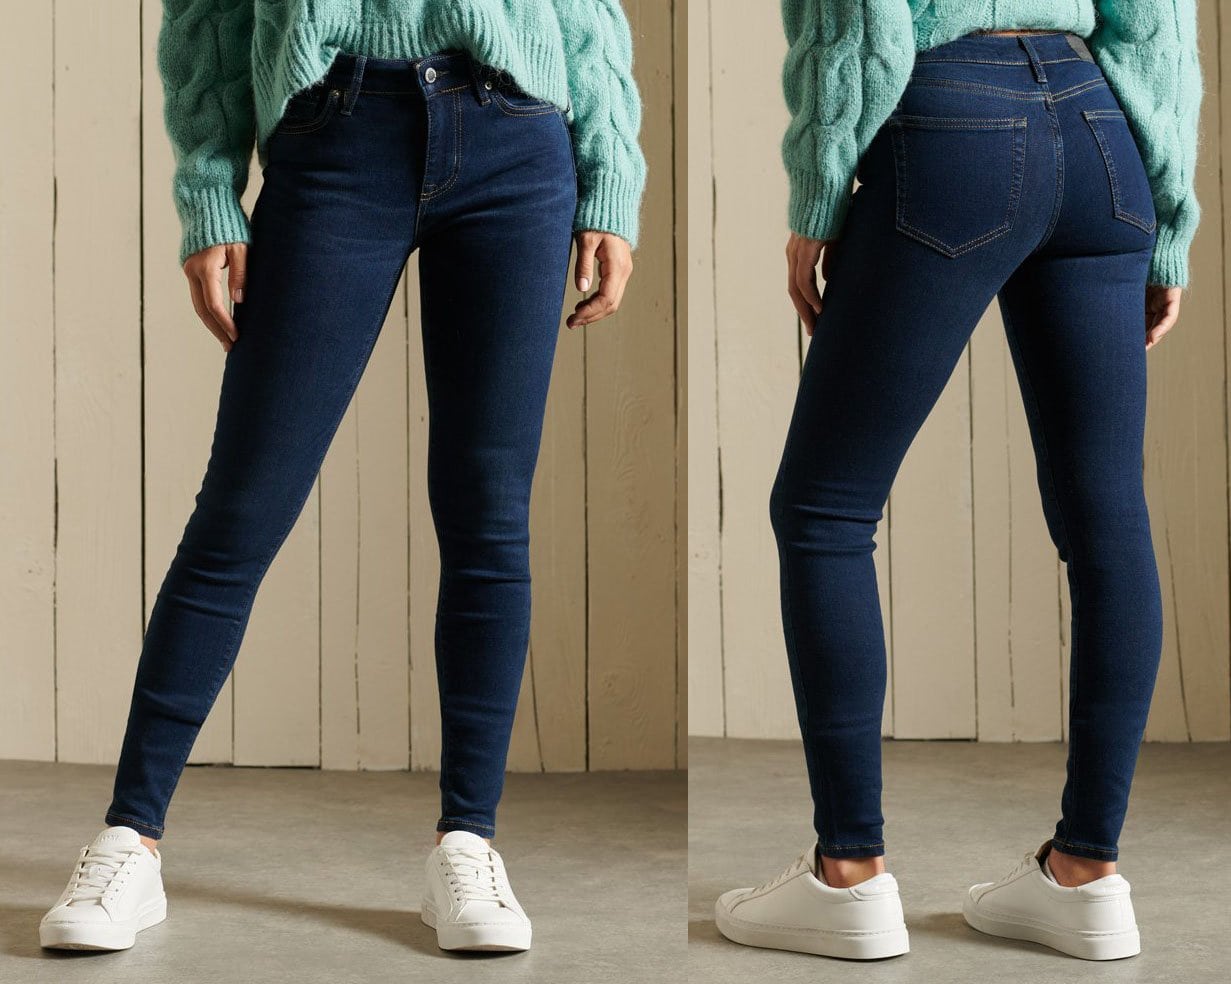 These mid-rise skinny jeans have a classic five-pocket design and enough stretch for comfort